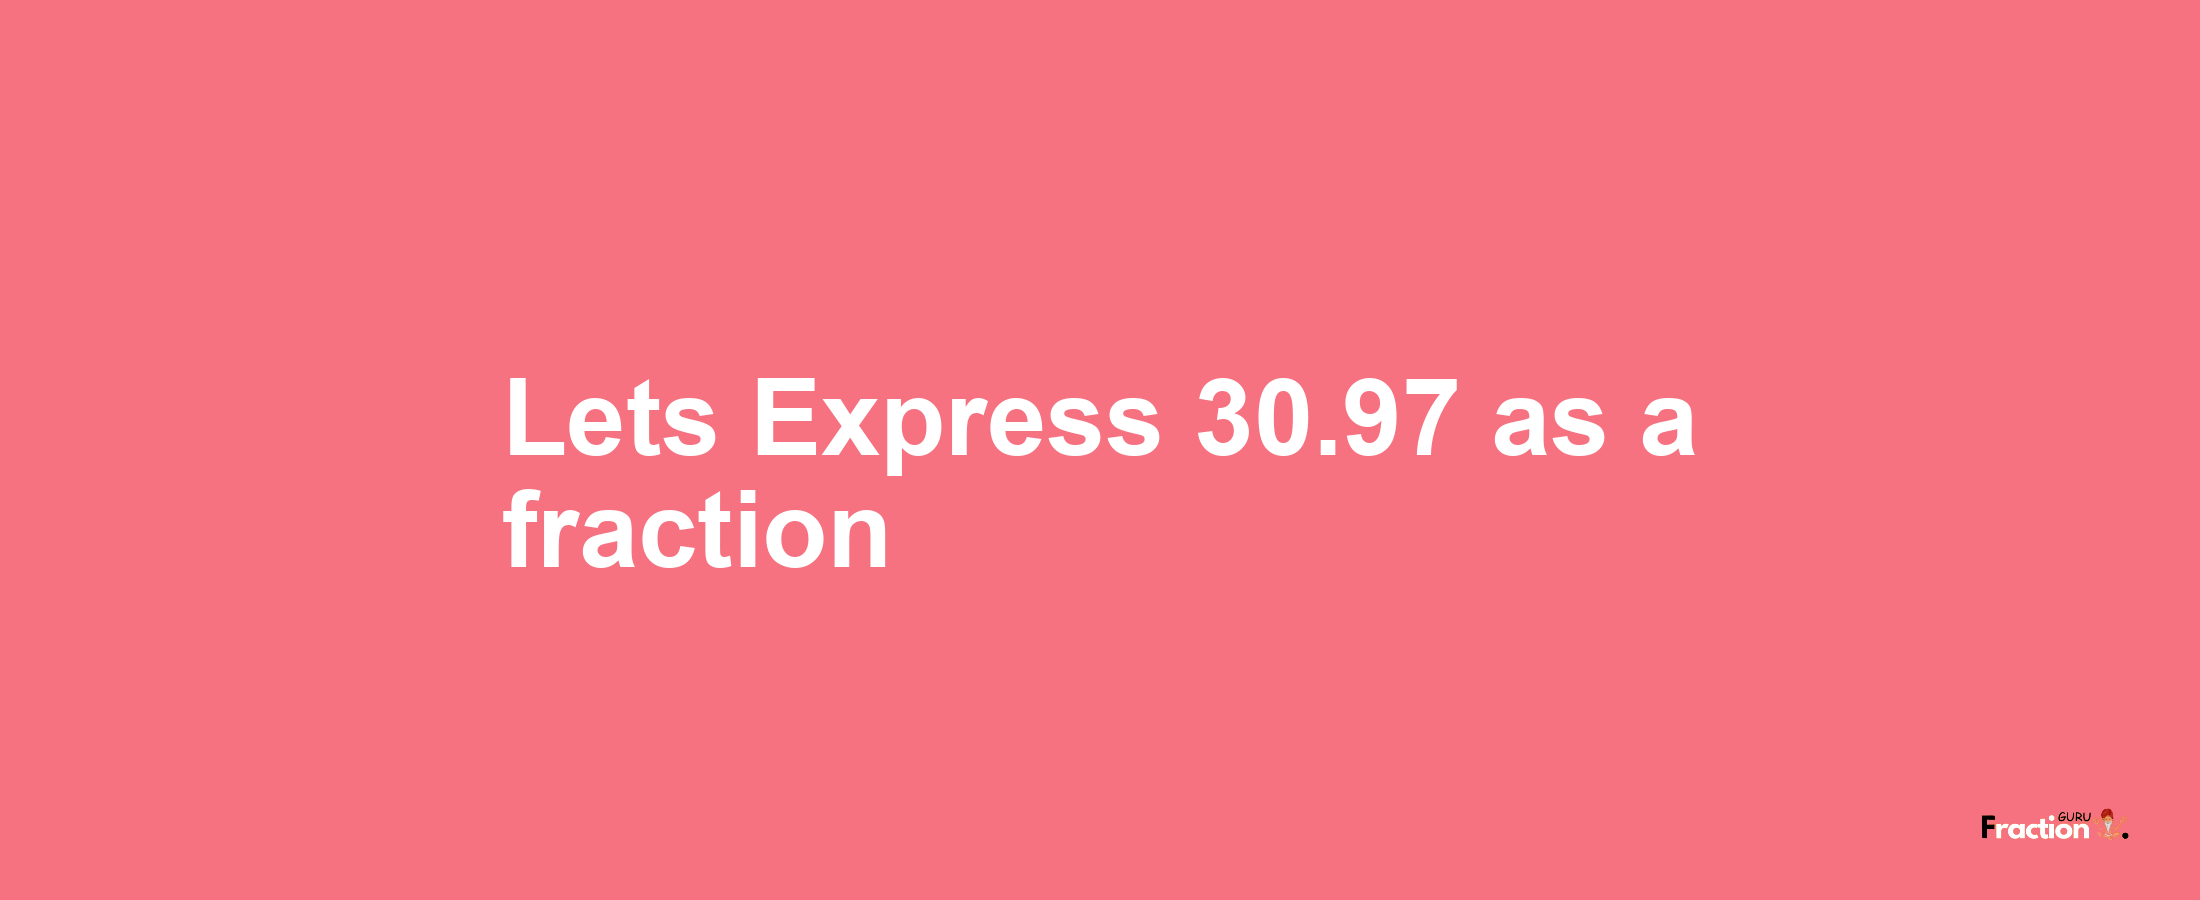 Lets Express 30.97 as afraction